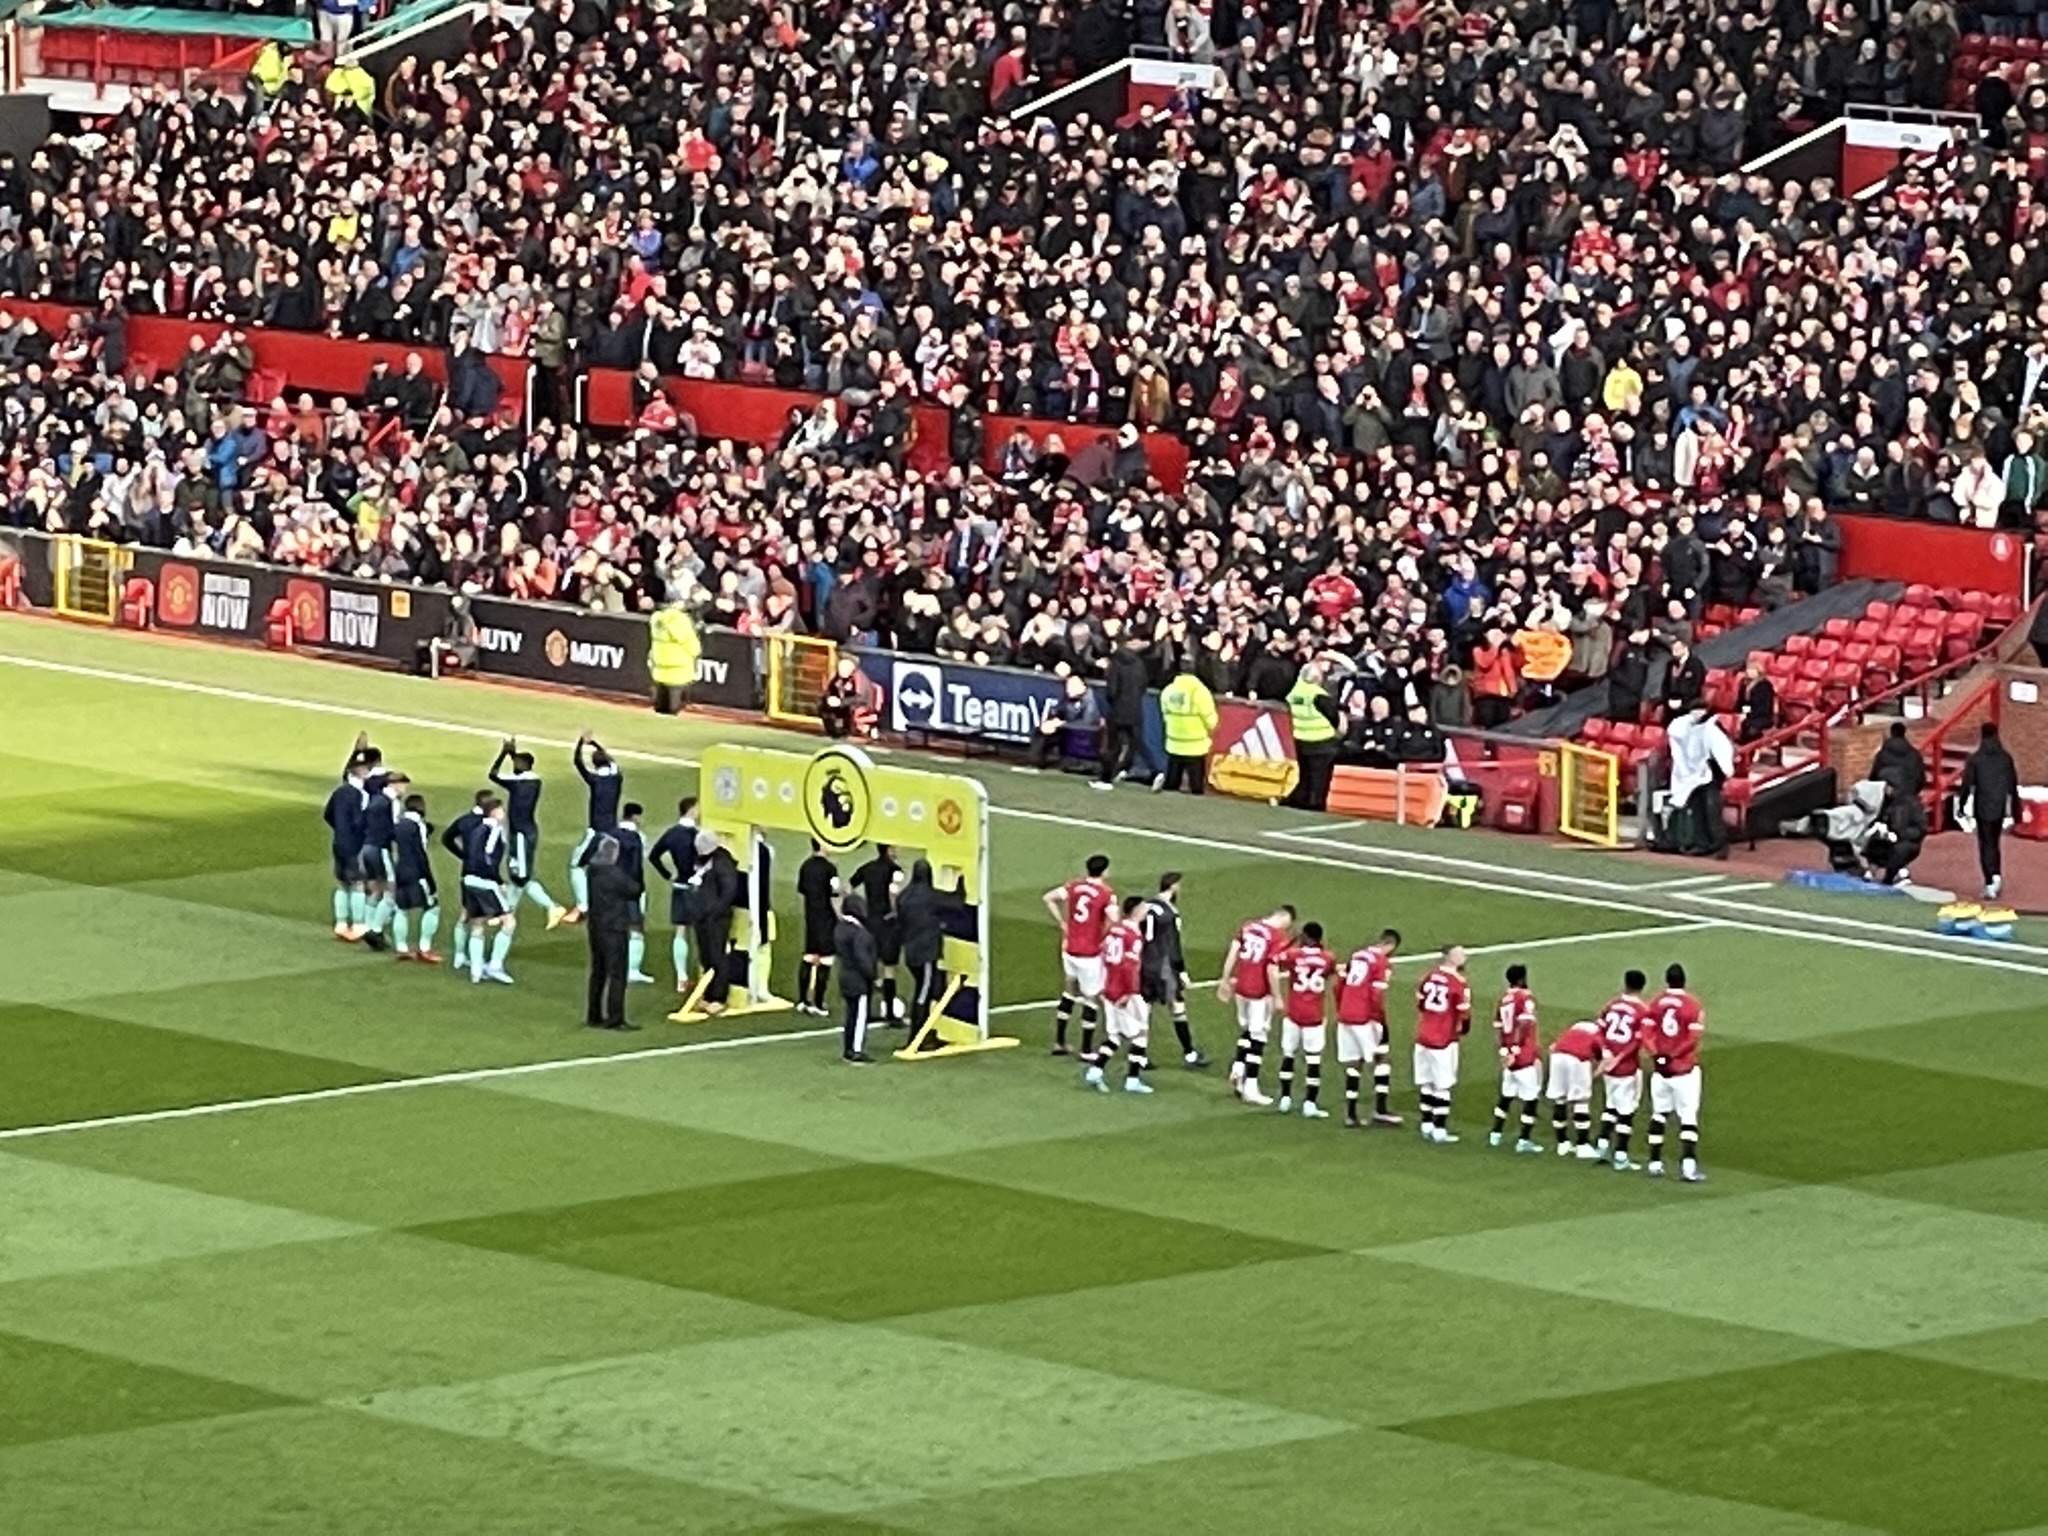 Manchester United v Leicester City - Saturday 2nd April 2022 image 1